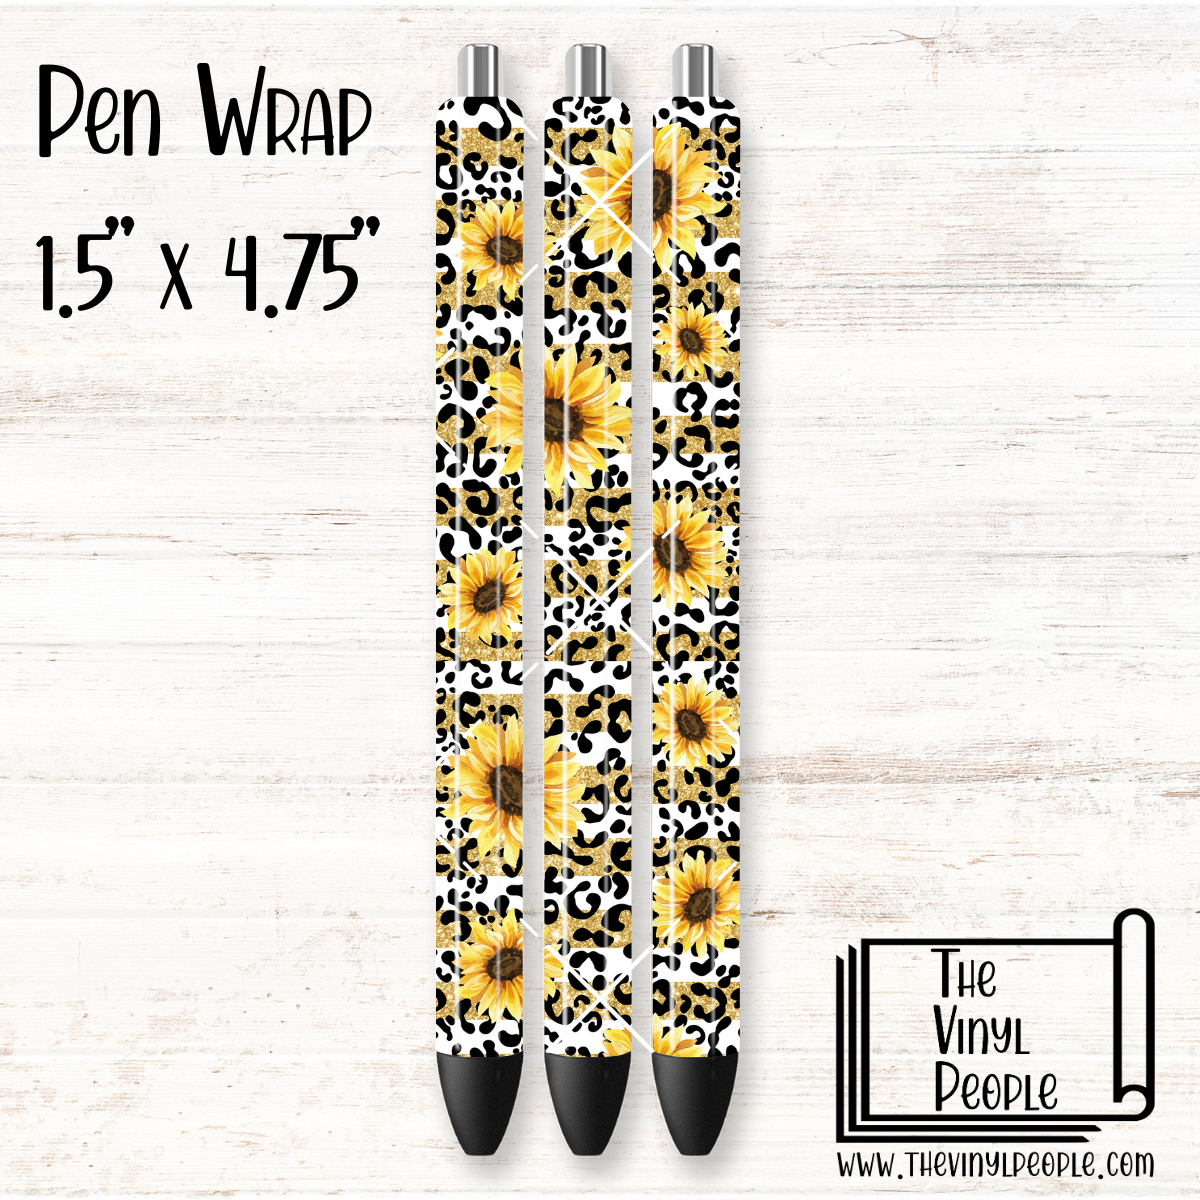 Wild About Sunflowers Pen Wrap